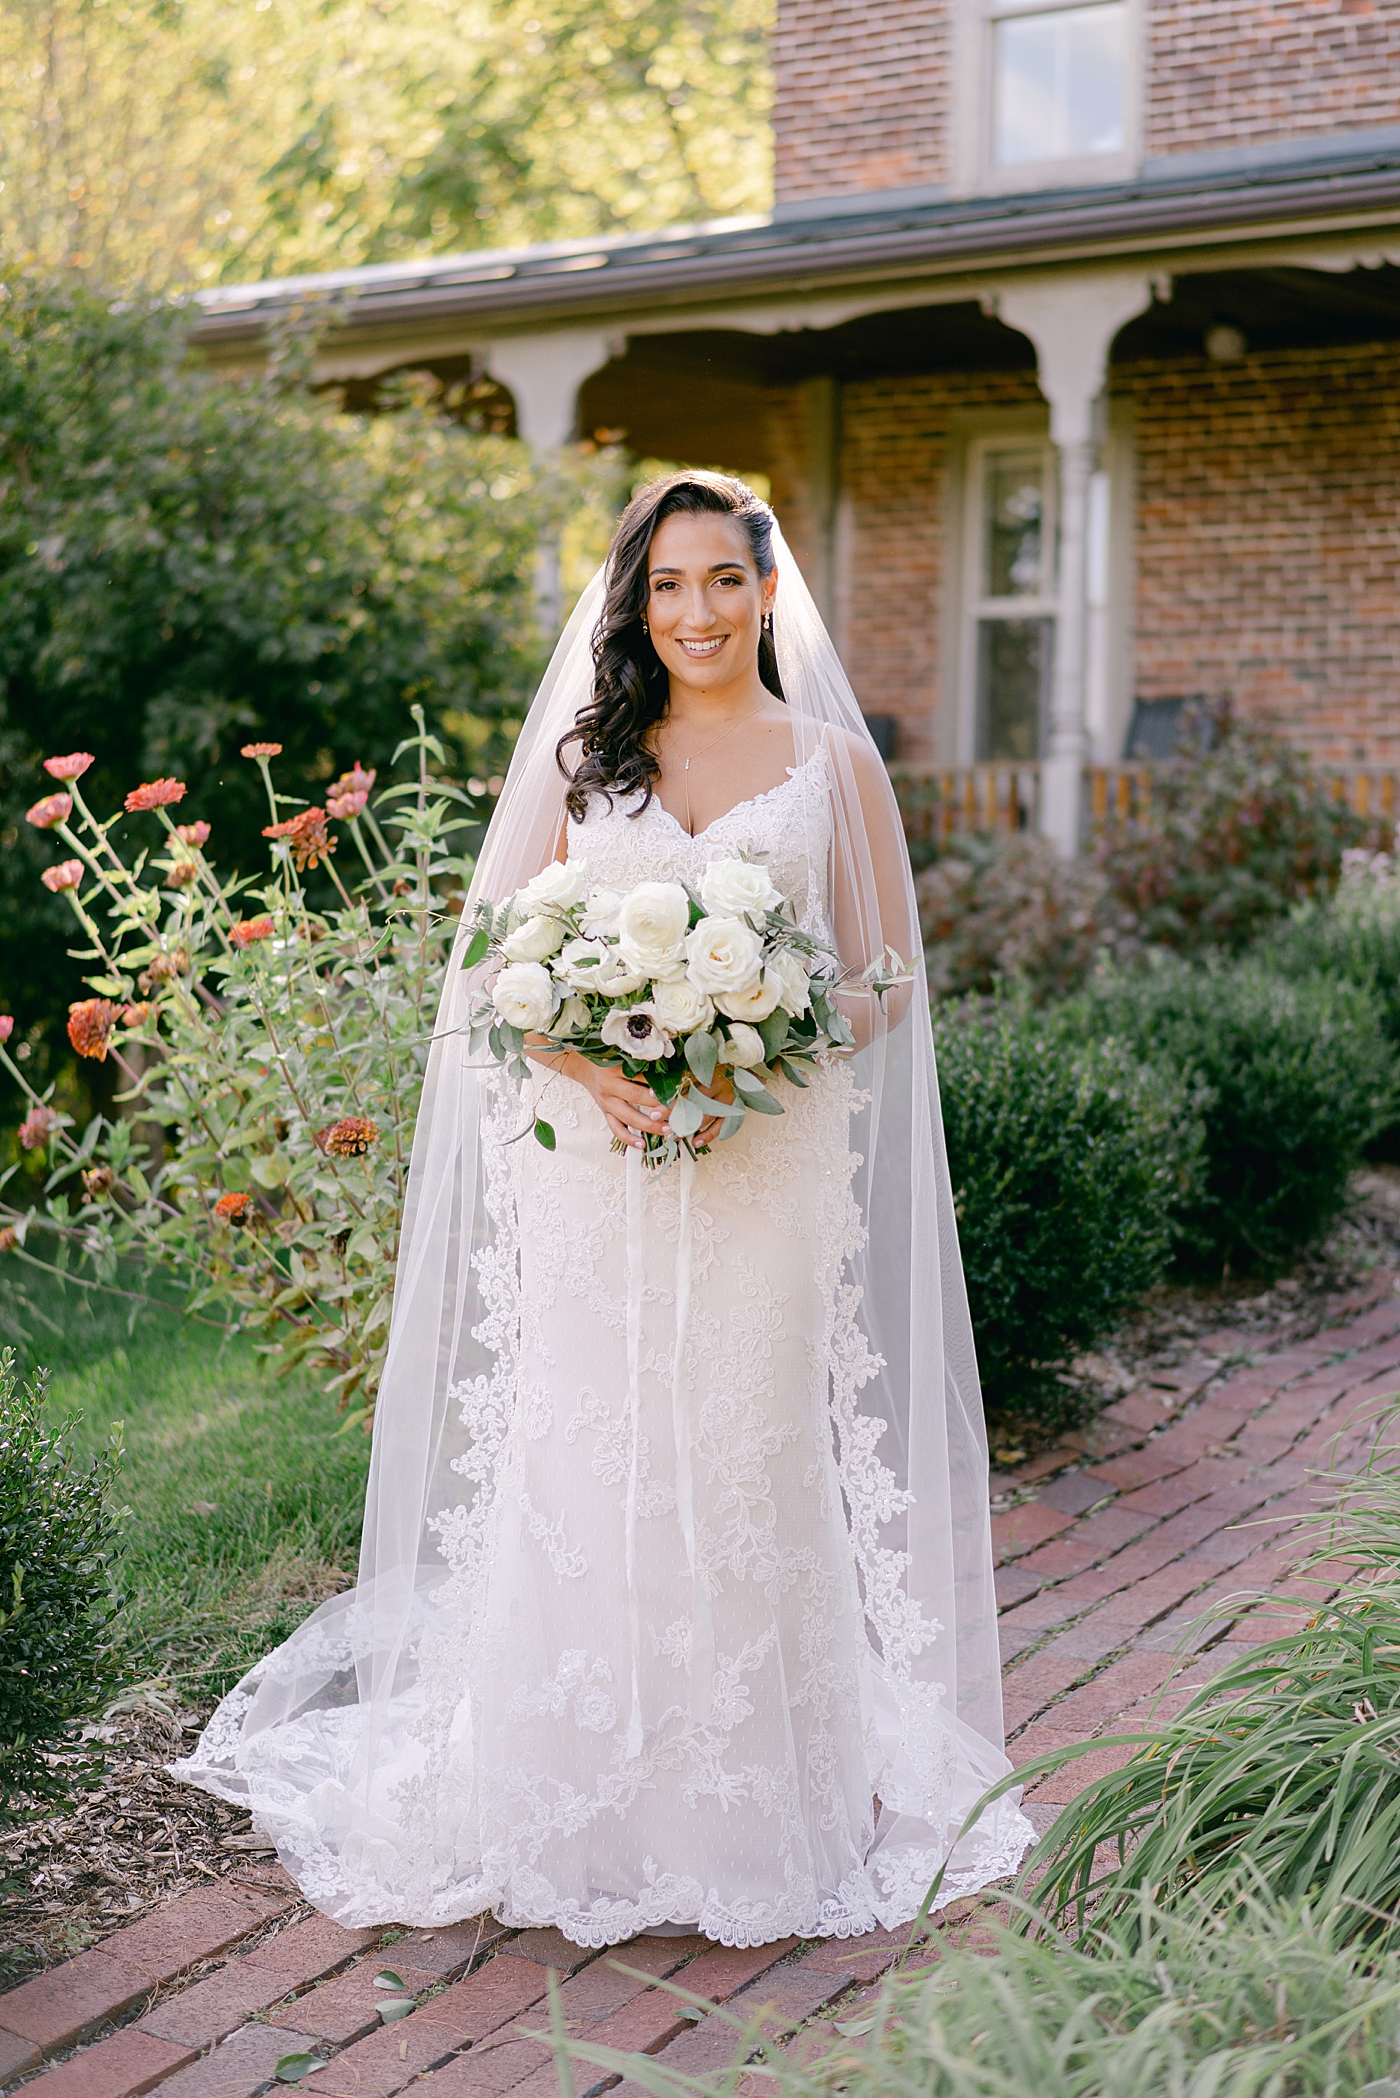 Bride posing for photos near zinnia flowers | Photo by Hope Helmuth Photography